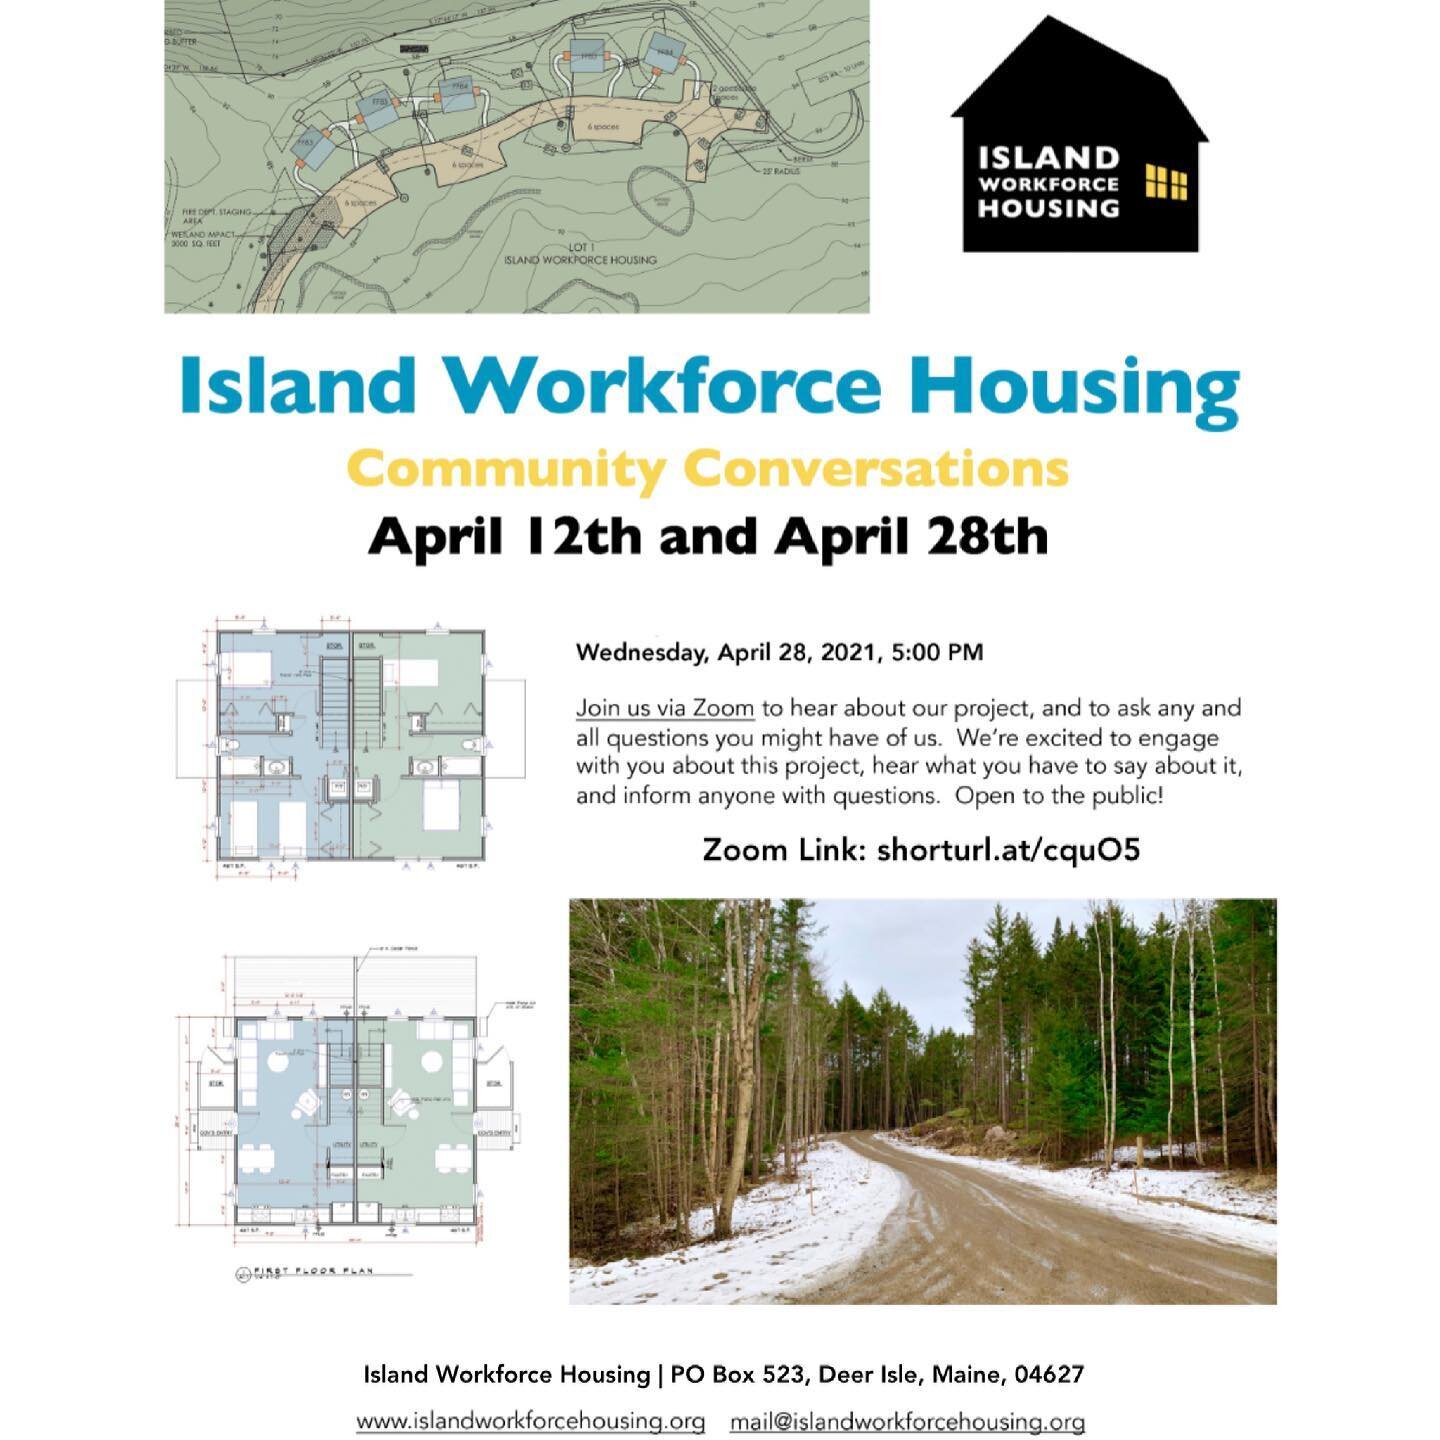 Island Workforce Housing will be hosting a Community Conversation on Wednesday, April 28th. This event will be open to the public and taking place over Zoom&mdash;look at our website for the meeting invitation, link in bio. We encourage you to attend